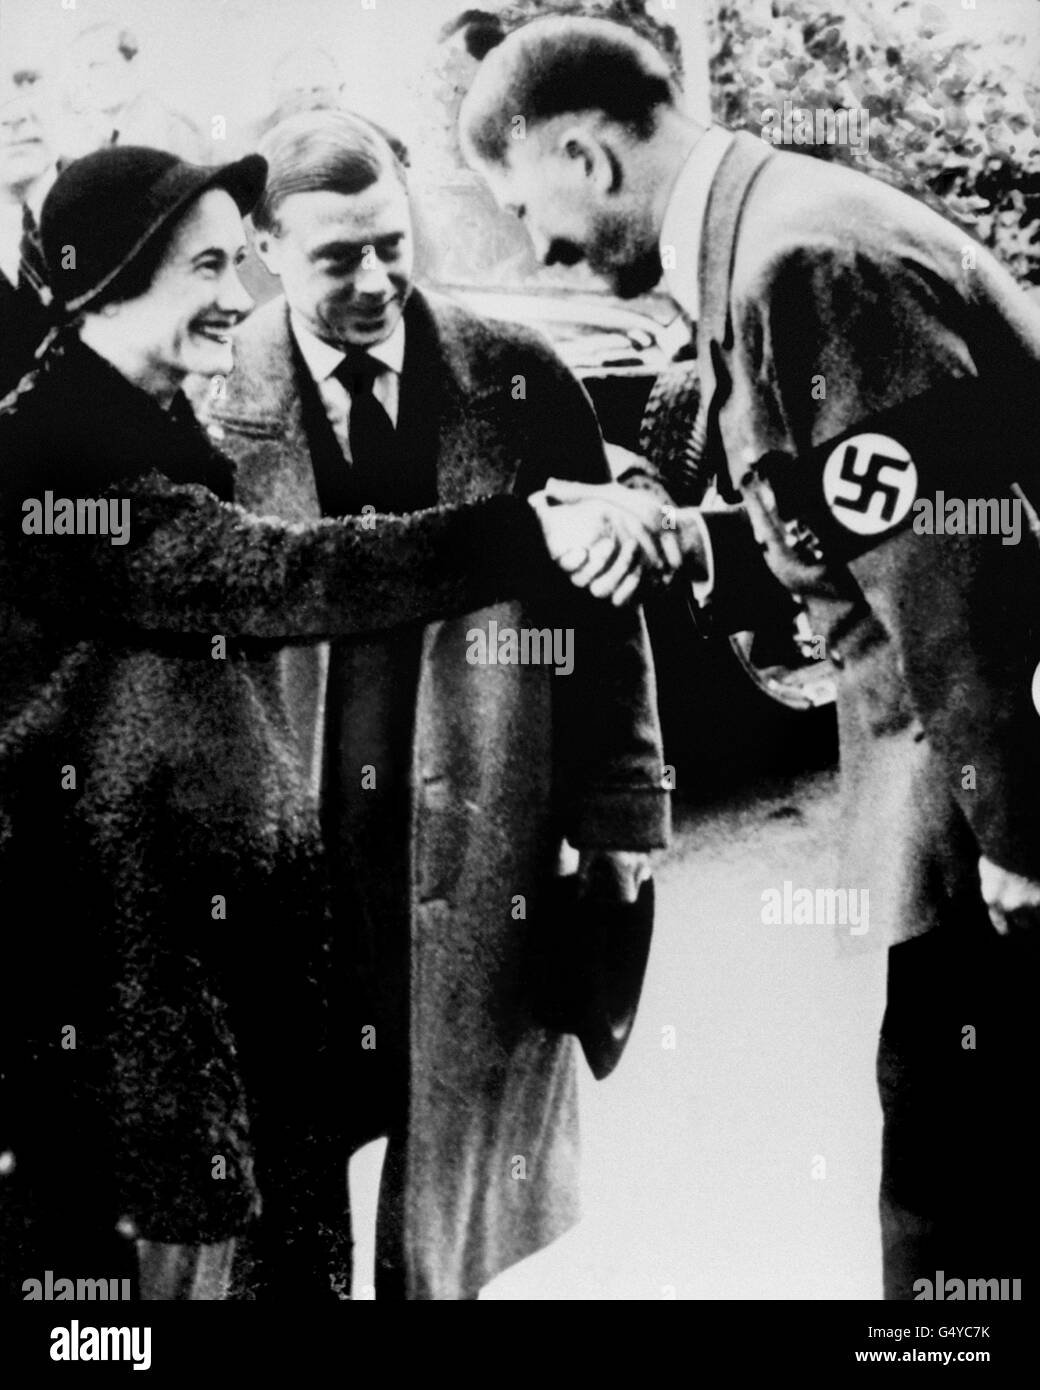 The Duke and Duchess of Windsor at their controversial meeting with German leader Adolf Hitler in Munich. Wartime premier Winston Churchill's concern that the Duke of Windsor was openly allying himself with pro-Nazis is shown clearly in long-secret documents made public. Stock Photo